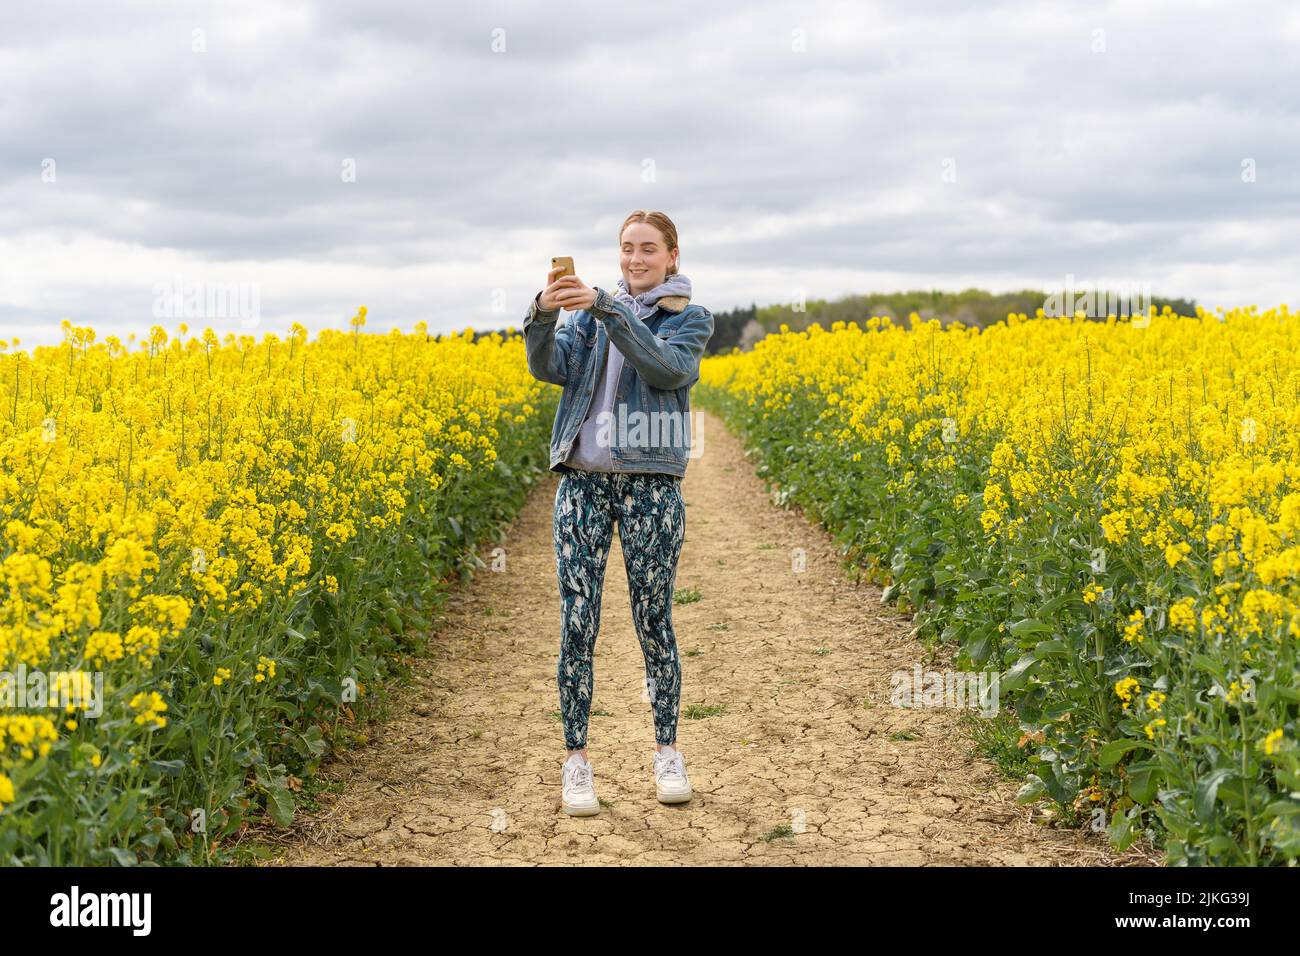 A young Caucasian girl taking photos of the white mustard field Stock Photo